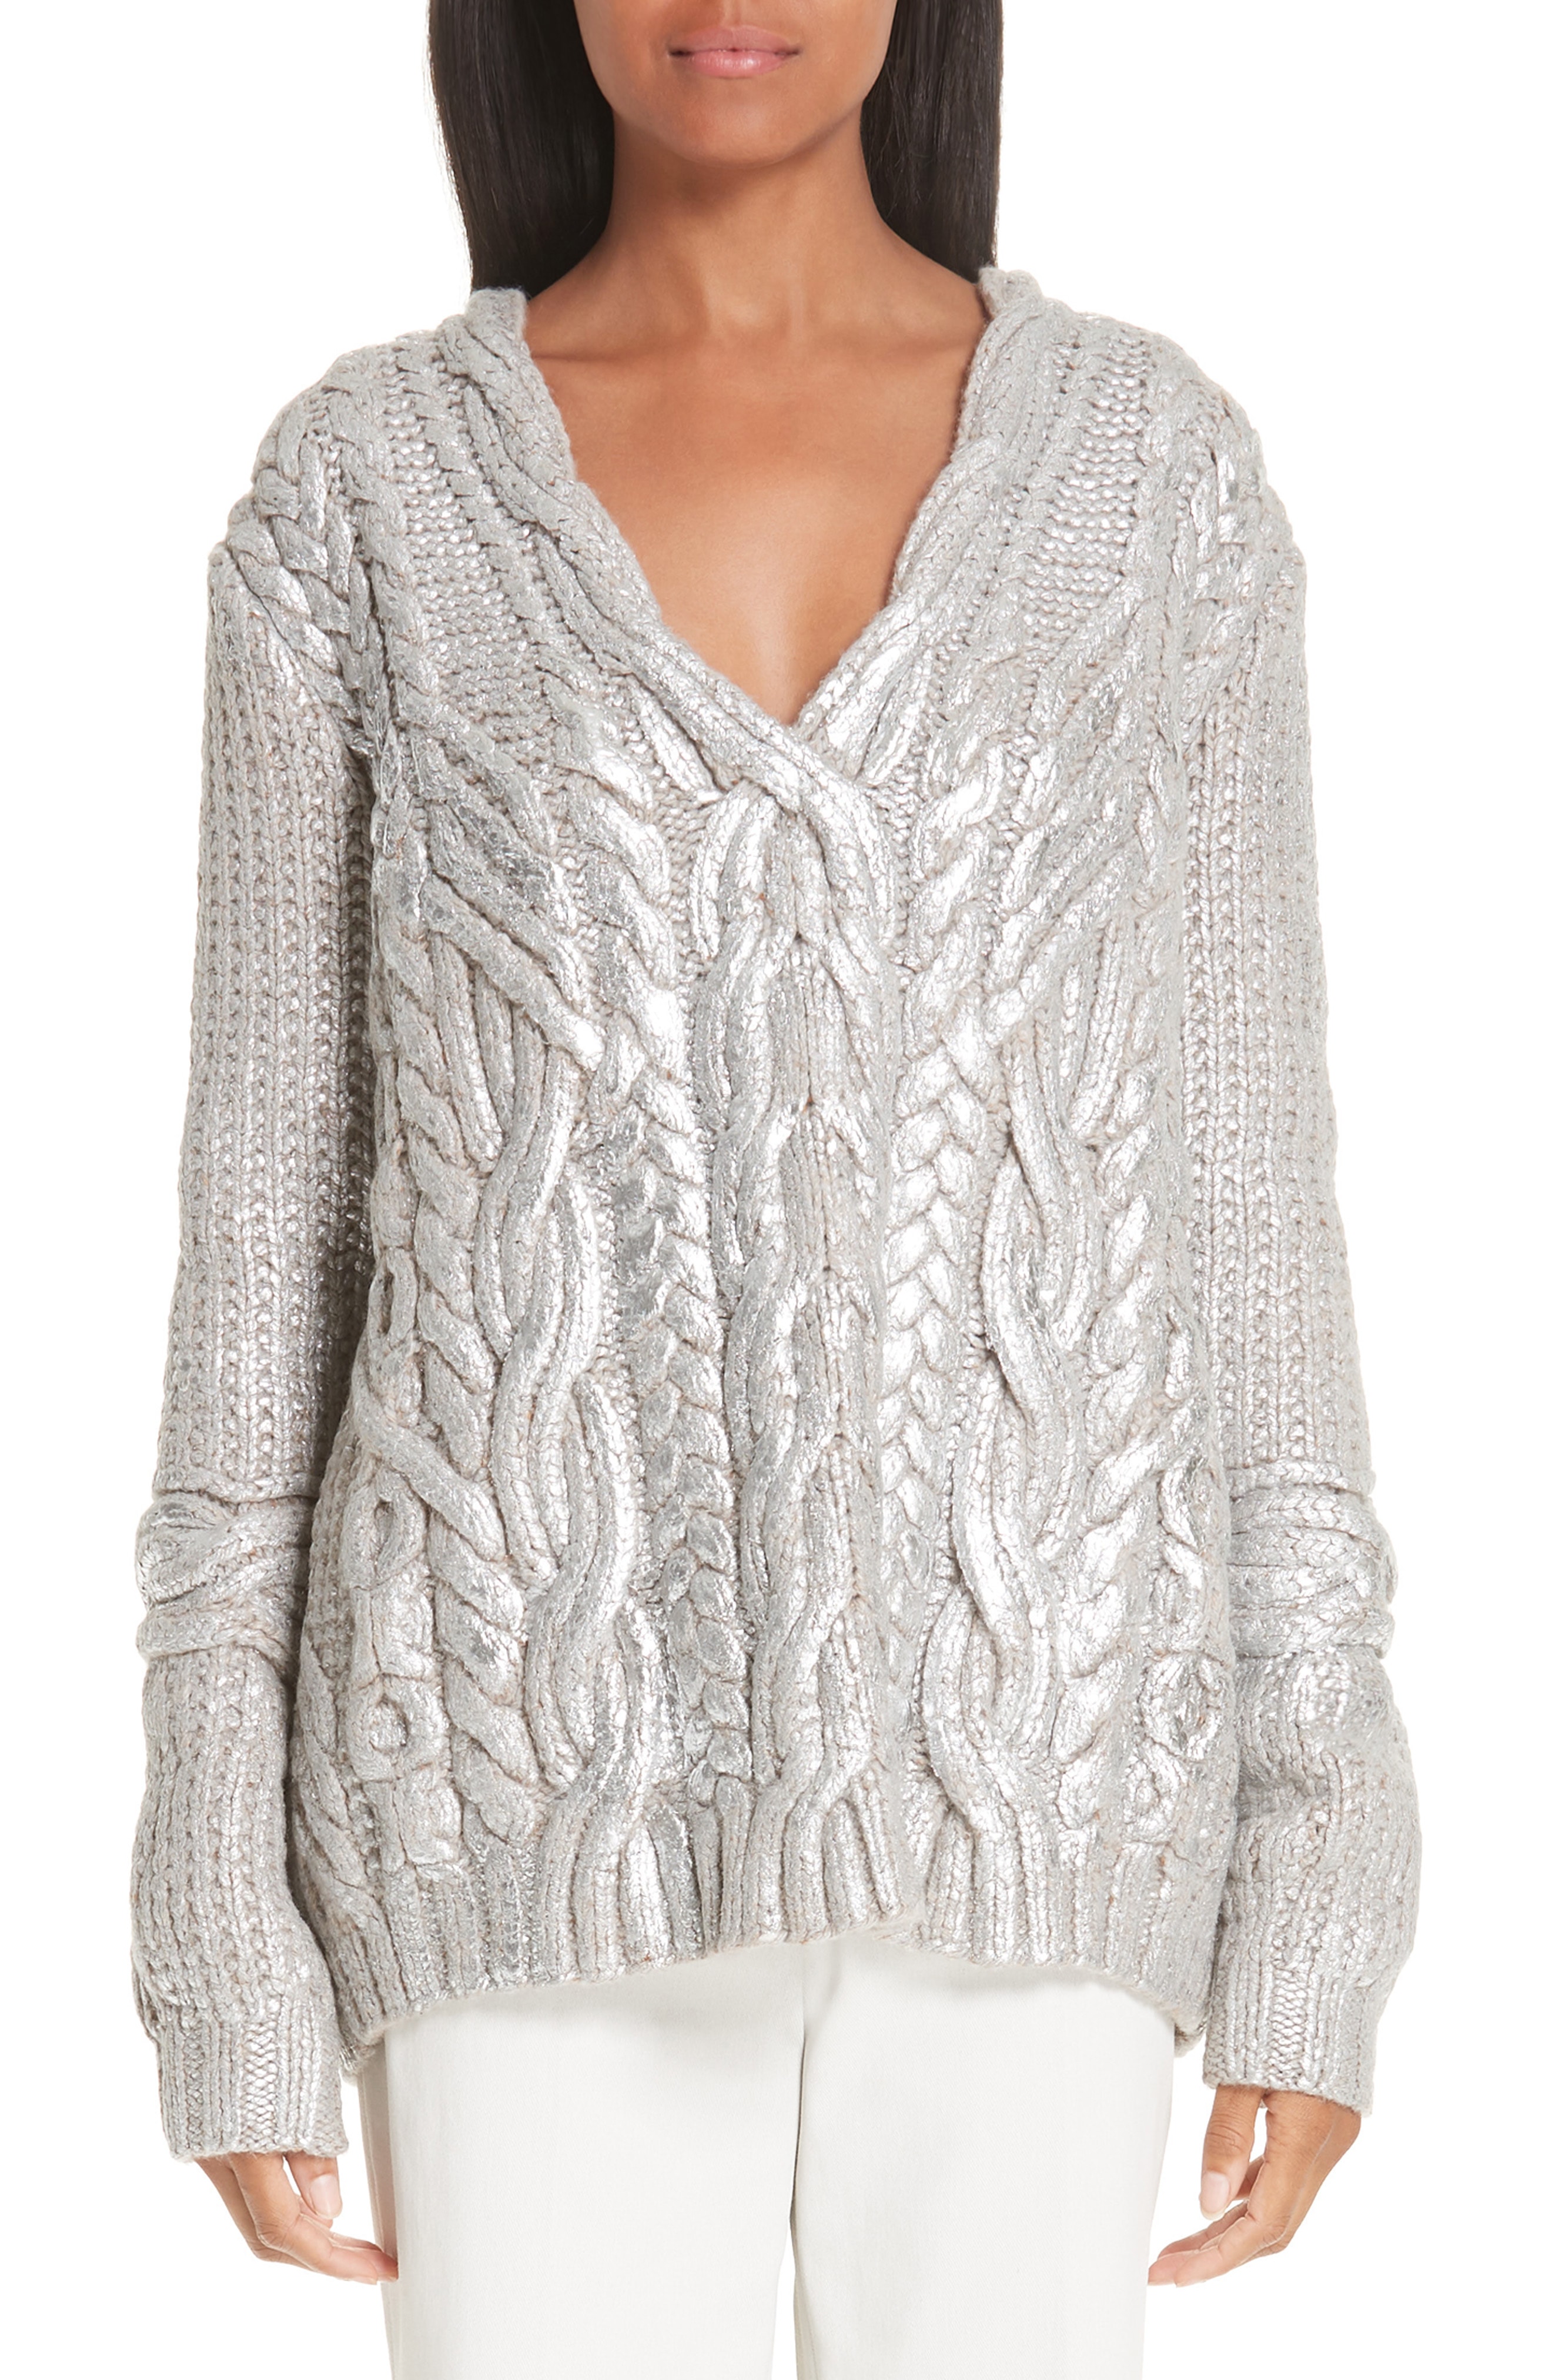 cable knit sweater | Nordstrom